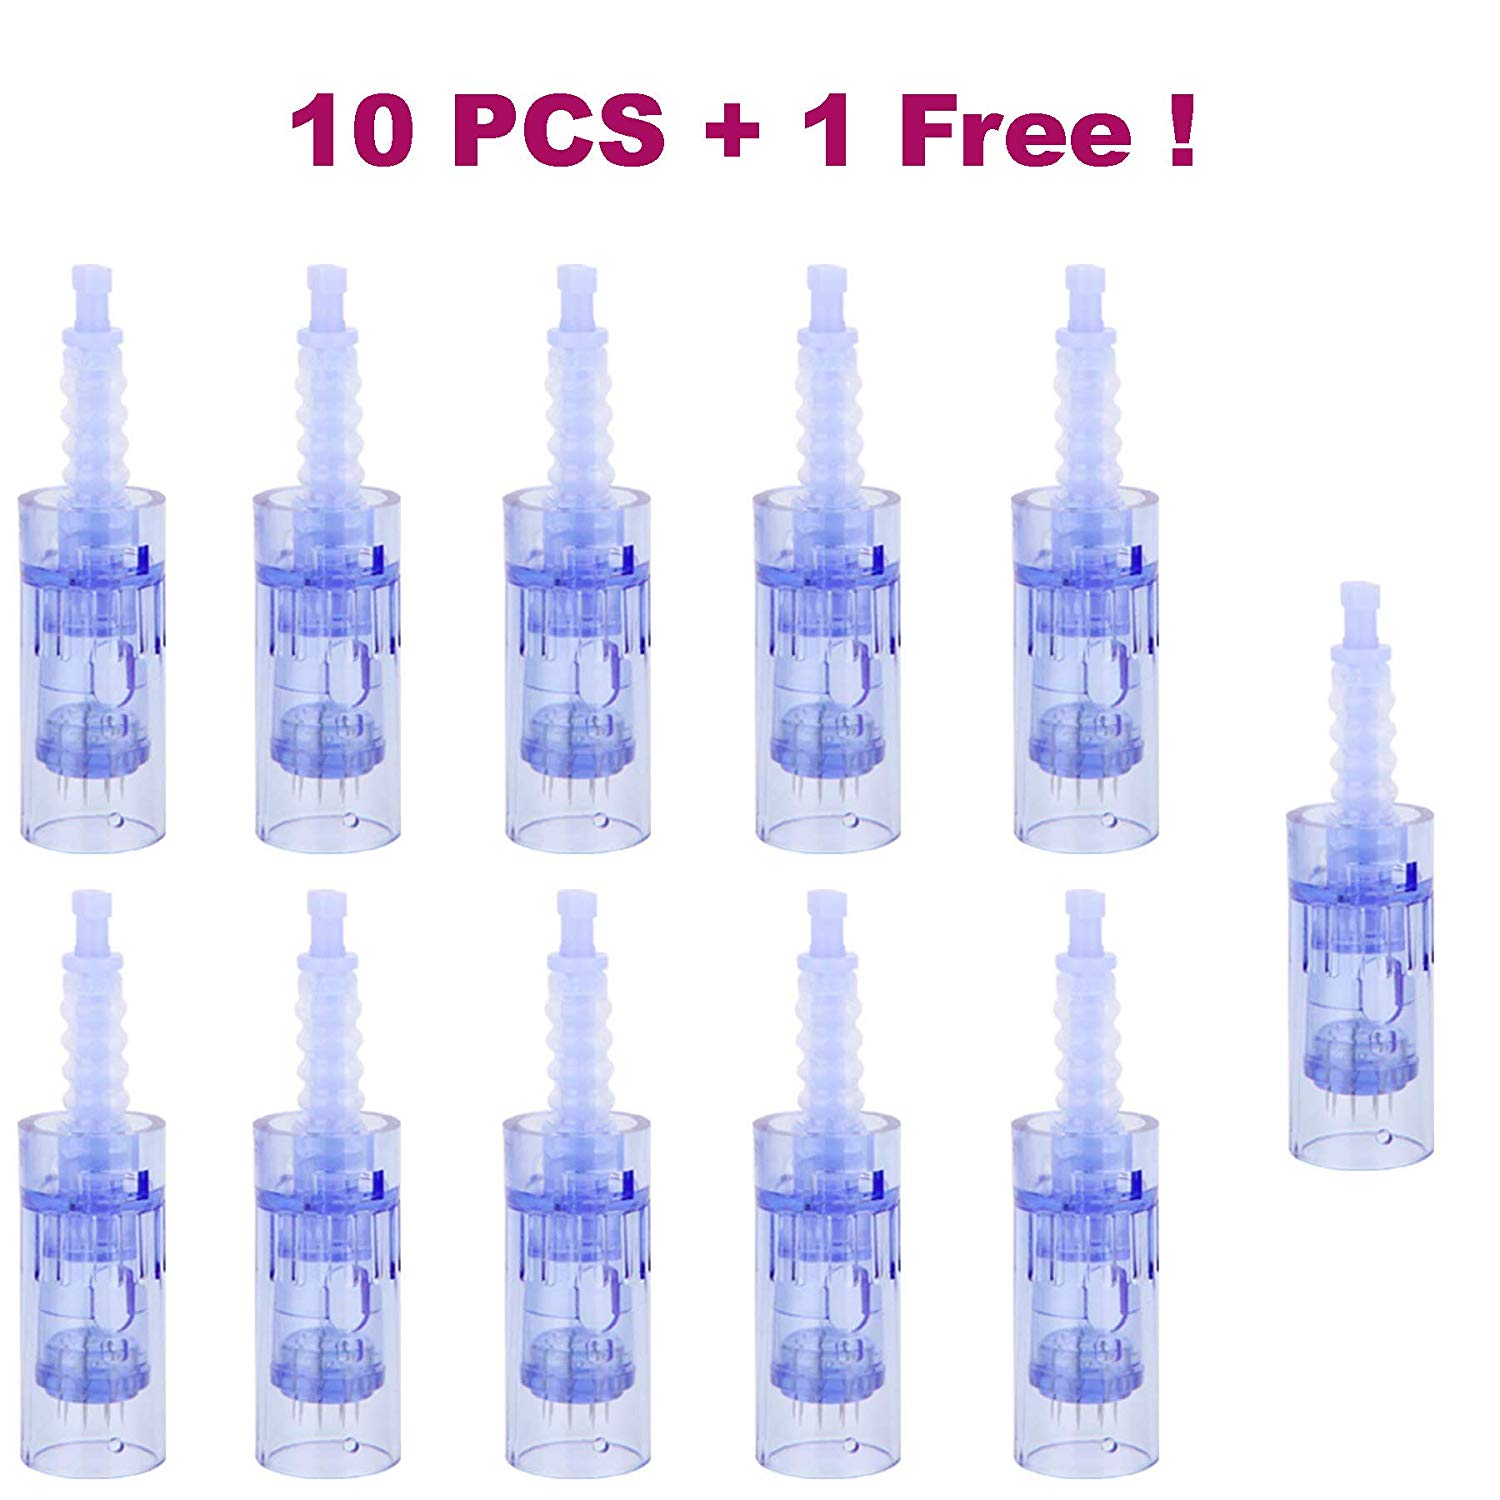 Ultima A6 Dr. Pen Replacement Micro Needle Cartridges 1 3 5 7 9 12 36 42 Nano Silicone